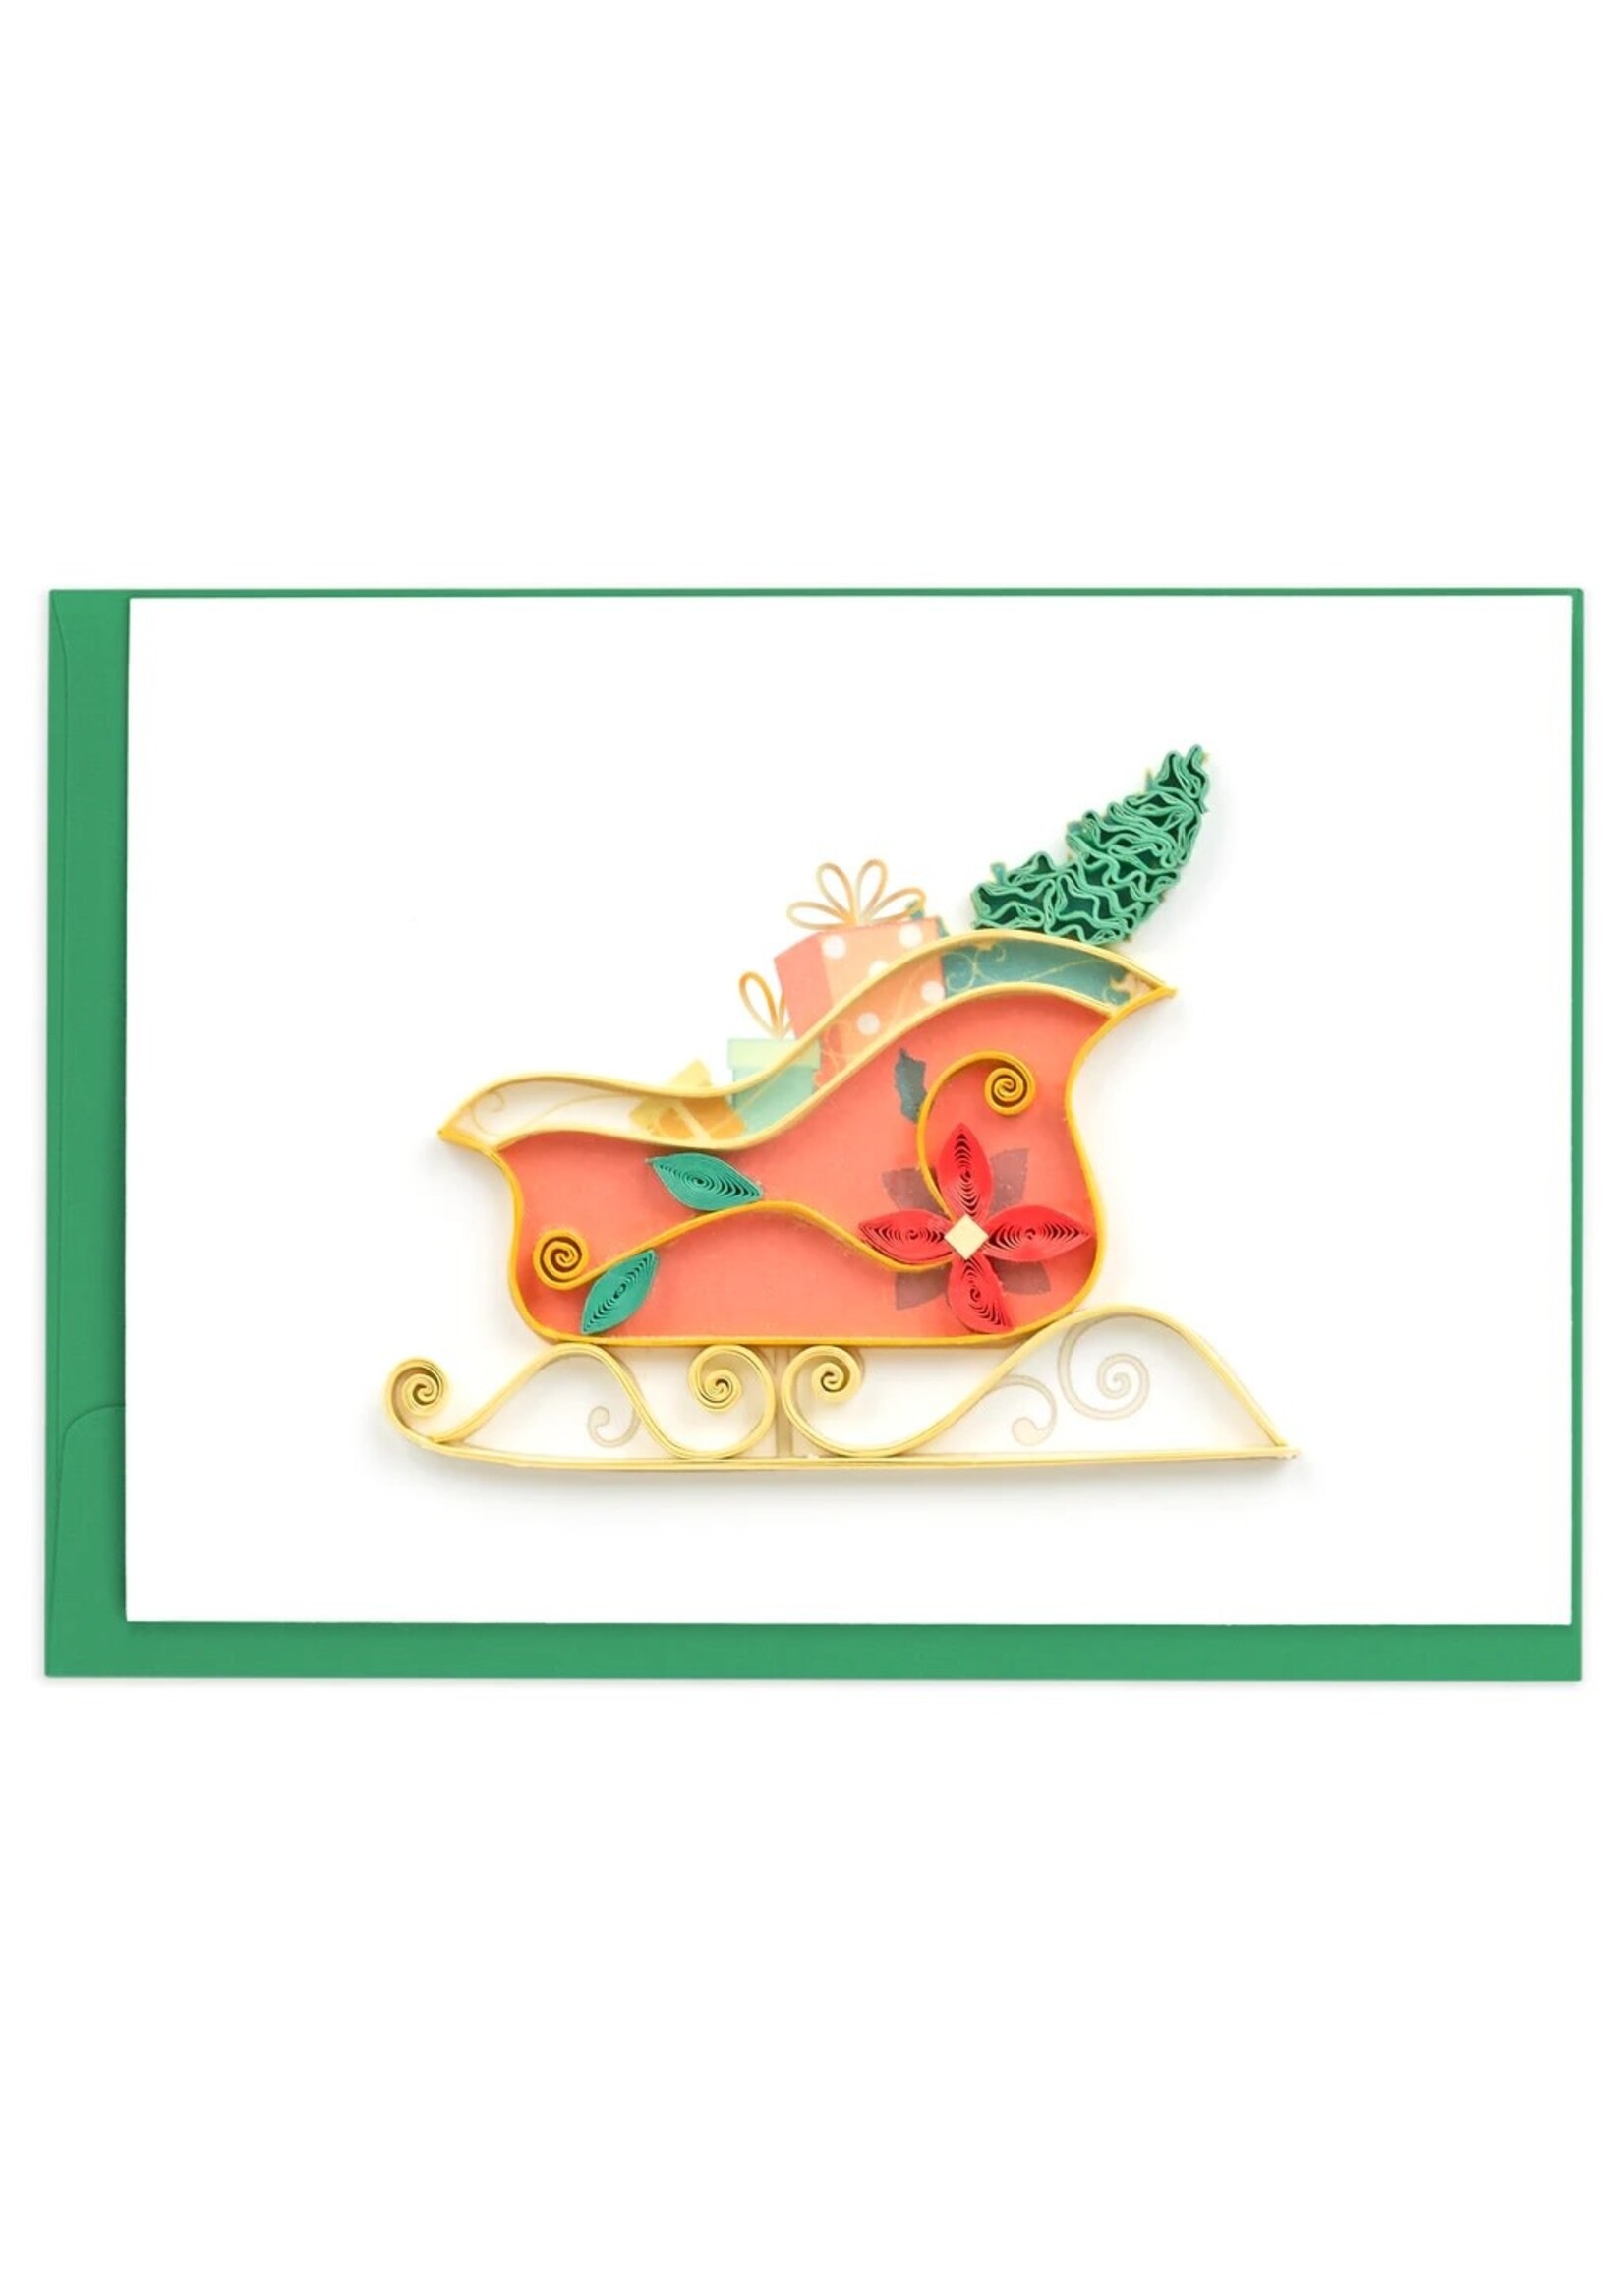 Quilled Gift Enclosure - Mini Card Sleigh